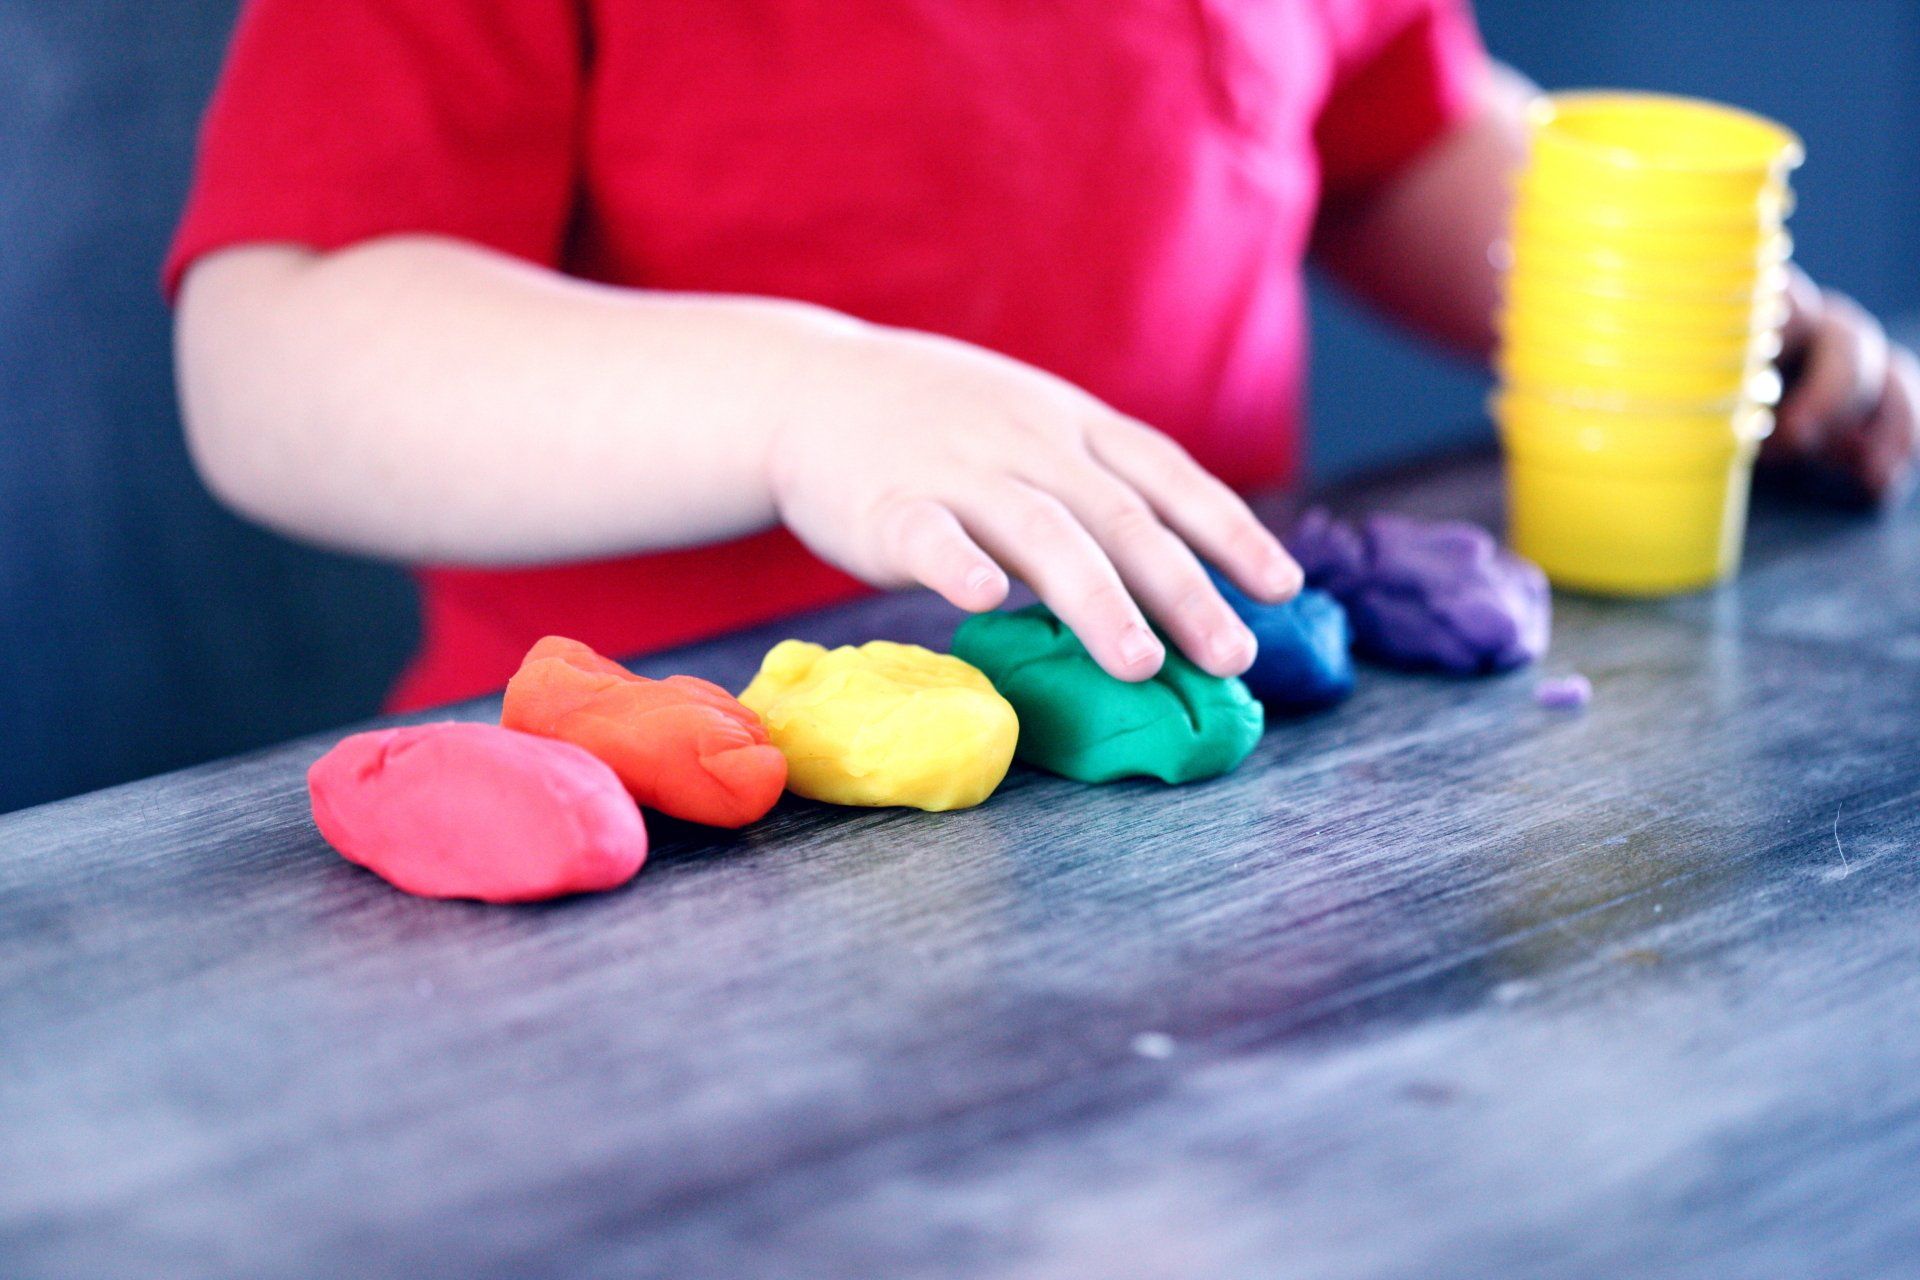 A child is playing with play dough on a table.